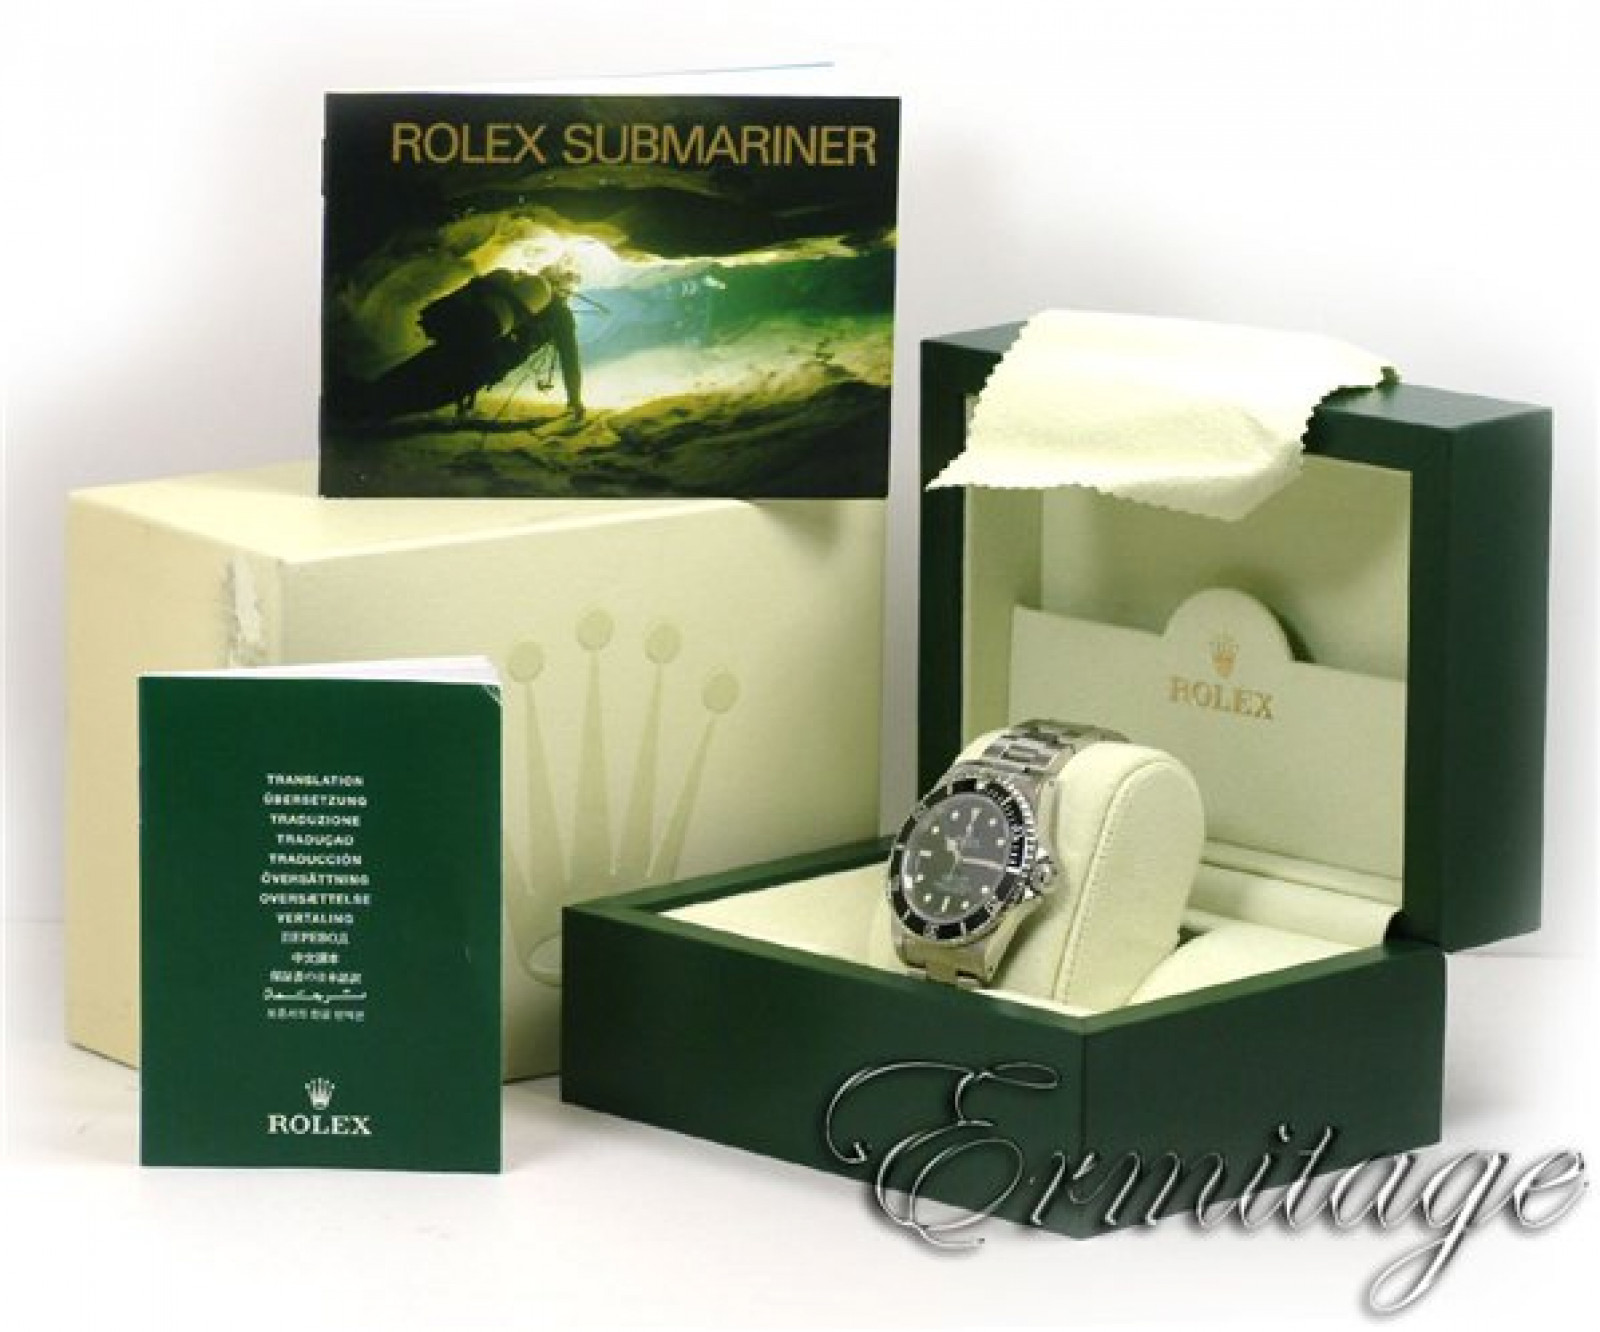 Pre-Owned Rolex Submariner 14060M Steel Year 2008